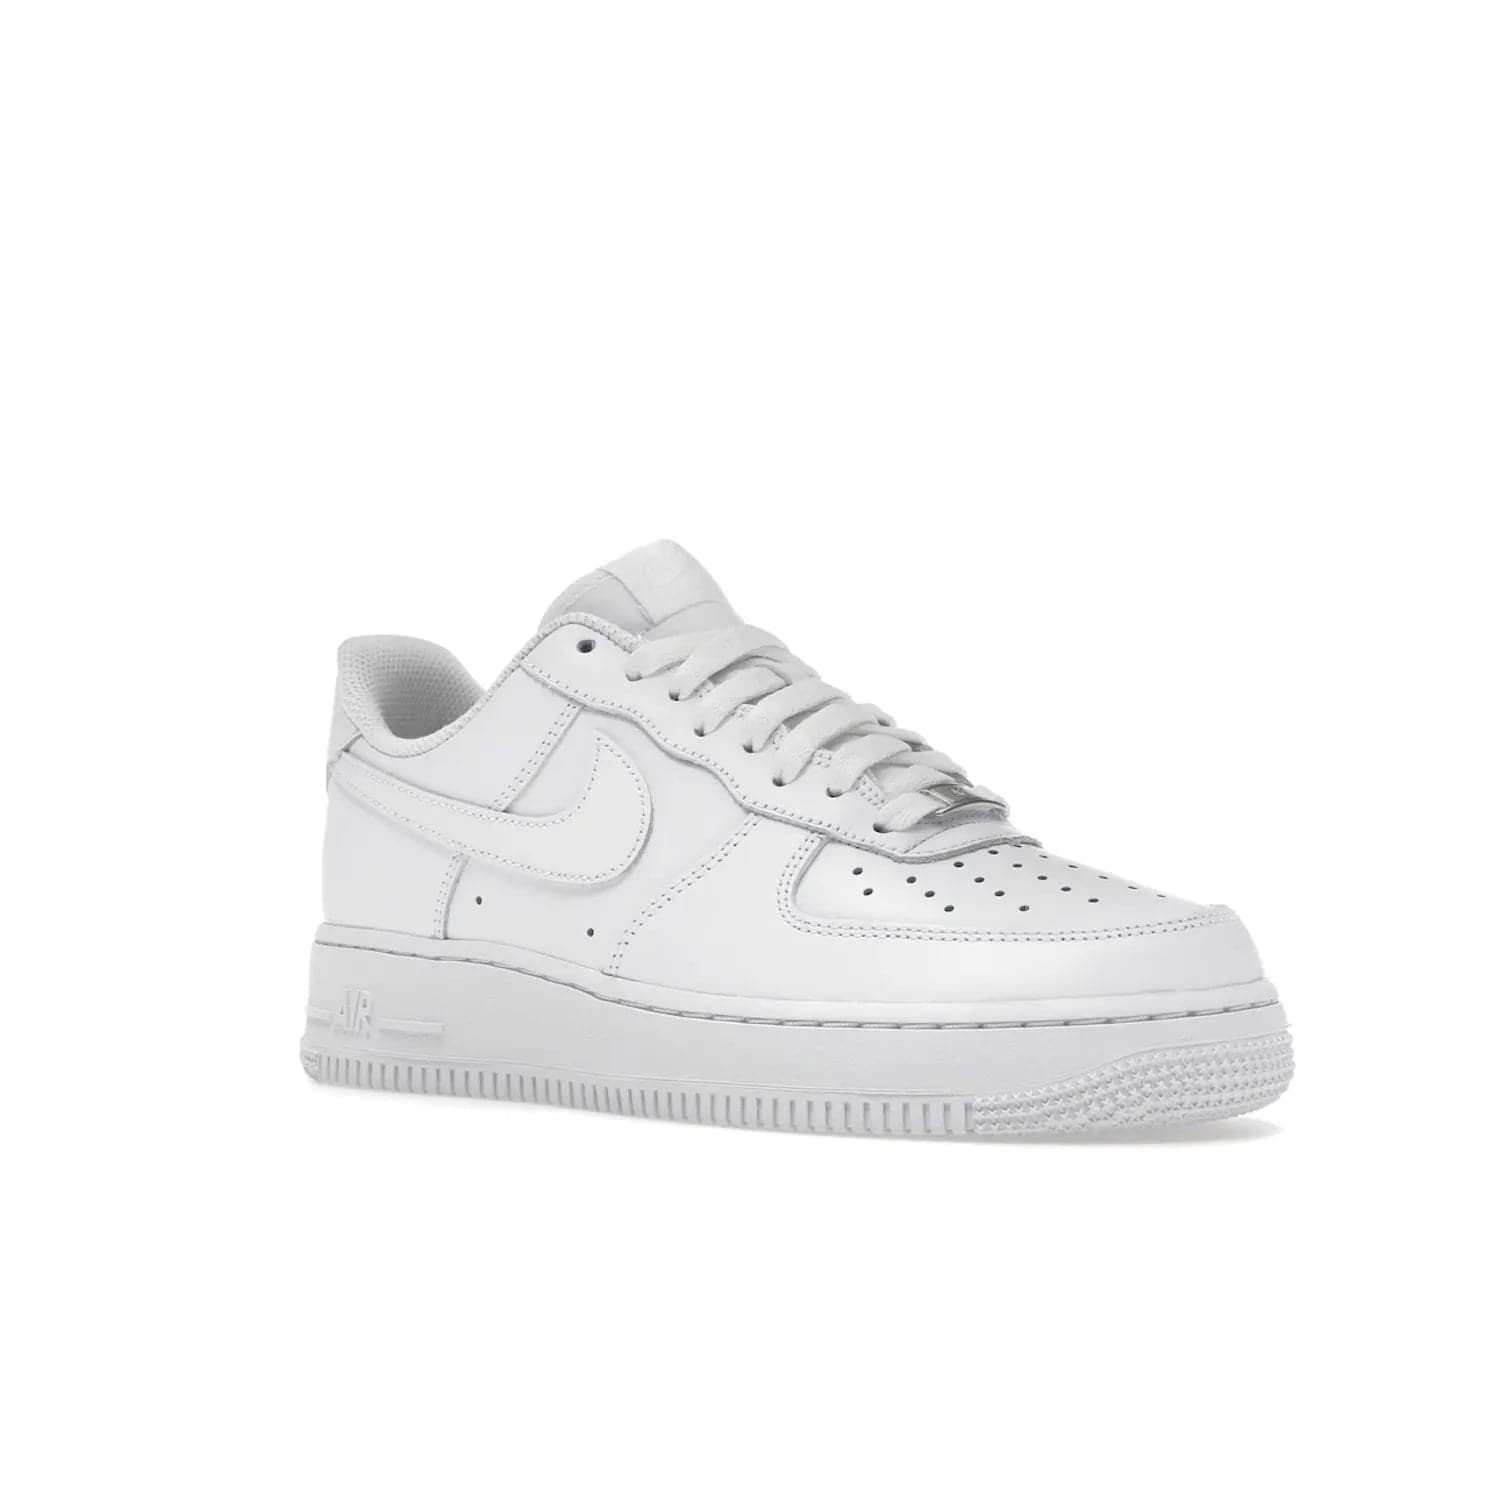 Nike Air Force 1 Low '07 White (Women's) - Image 5 - Only at www.BallersClubKickz.com - Timeless classic sneaker updated with white leather upper and perforated toe box. Nike heel embroidery and white sole. Released January 2018.